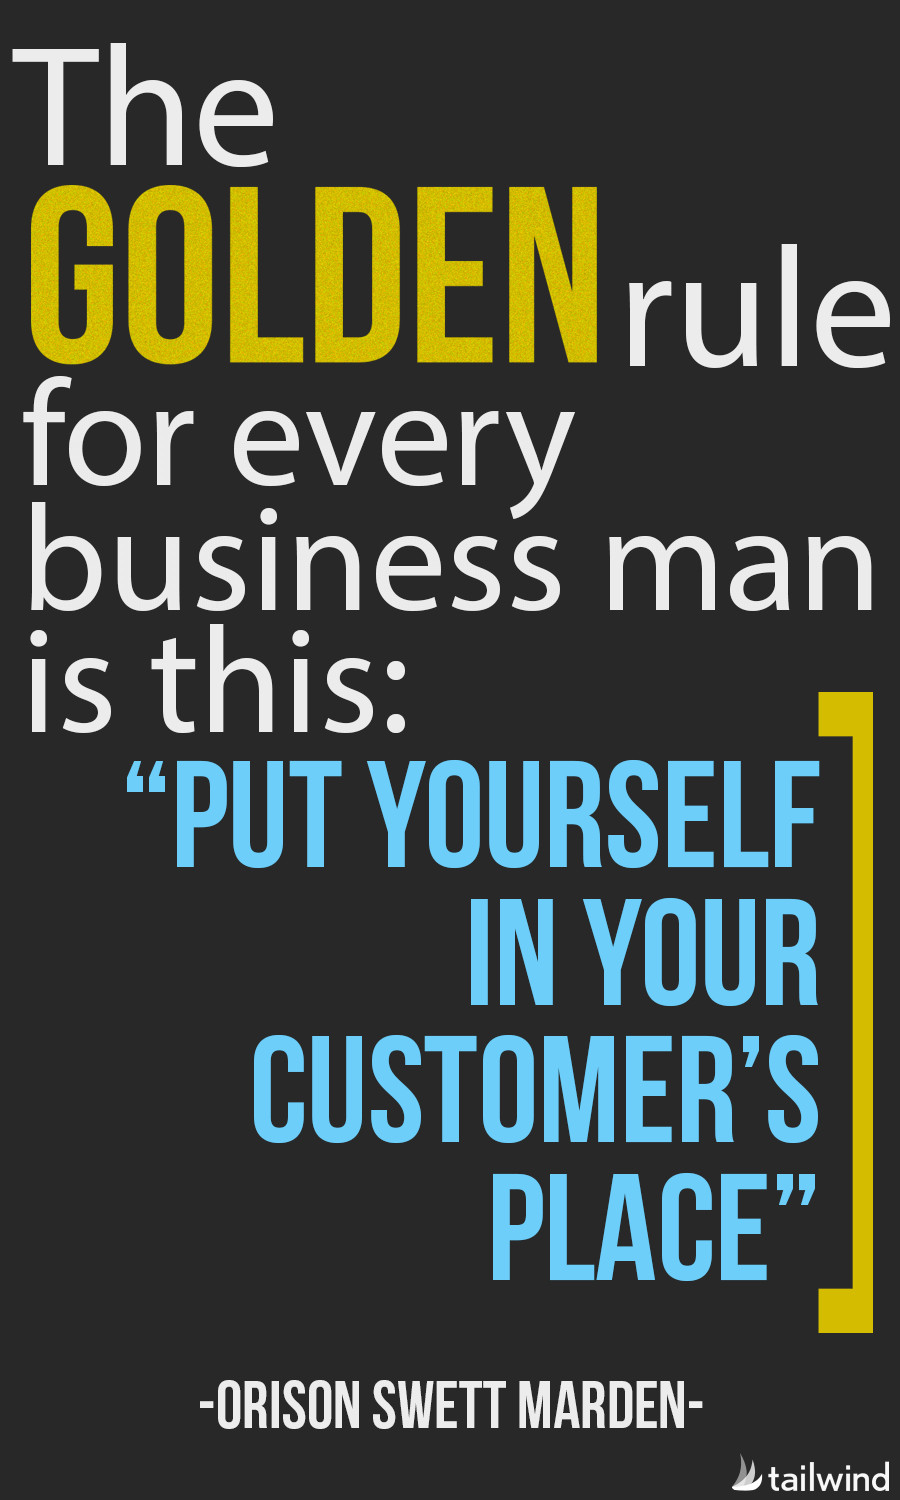 Inspirational Quotes For Businesses
 36 of Our Favorite Business Quotes Tailwind Blog